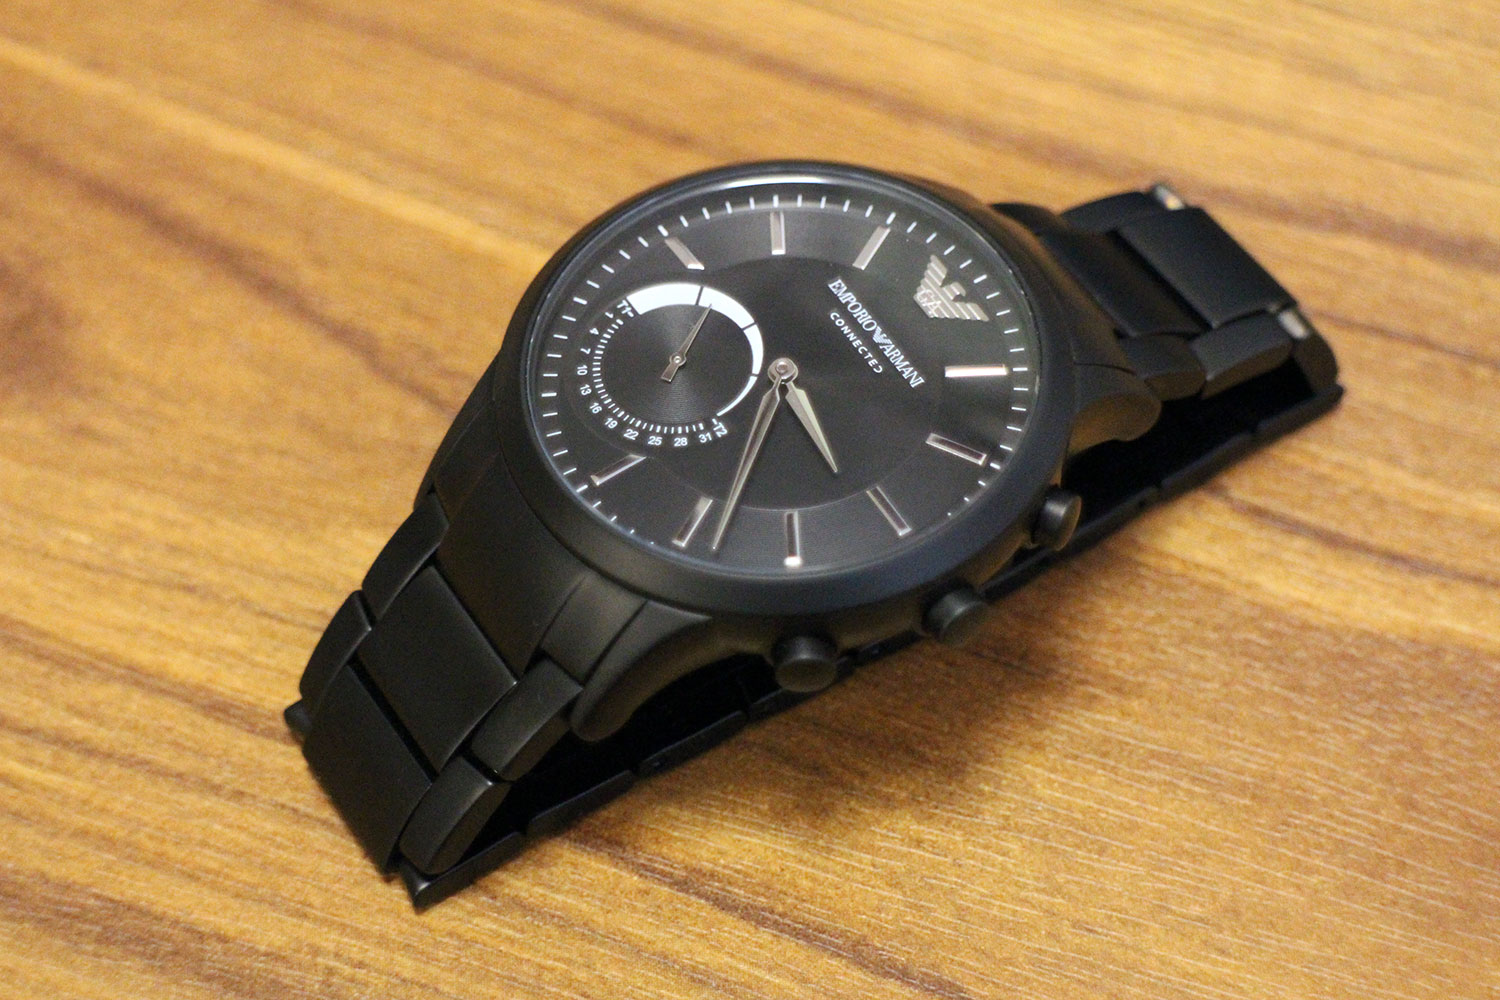 Emporio Armani EA Connected Watch: Review, Features, Price | Digital Trends